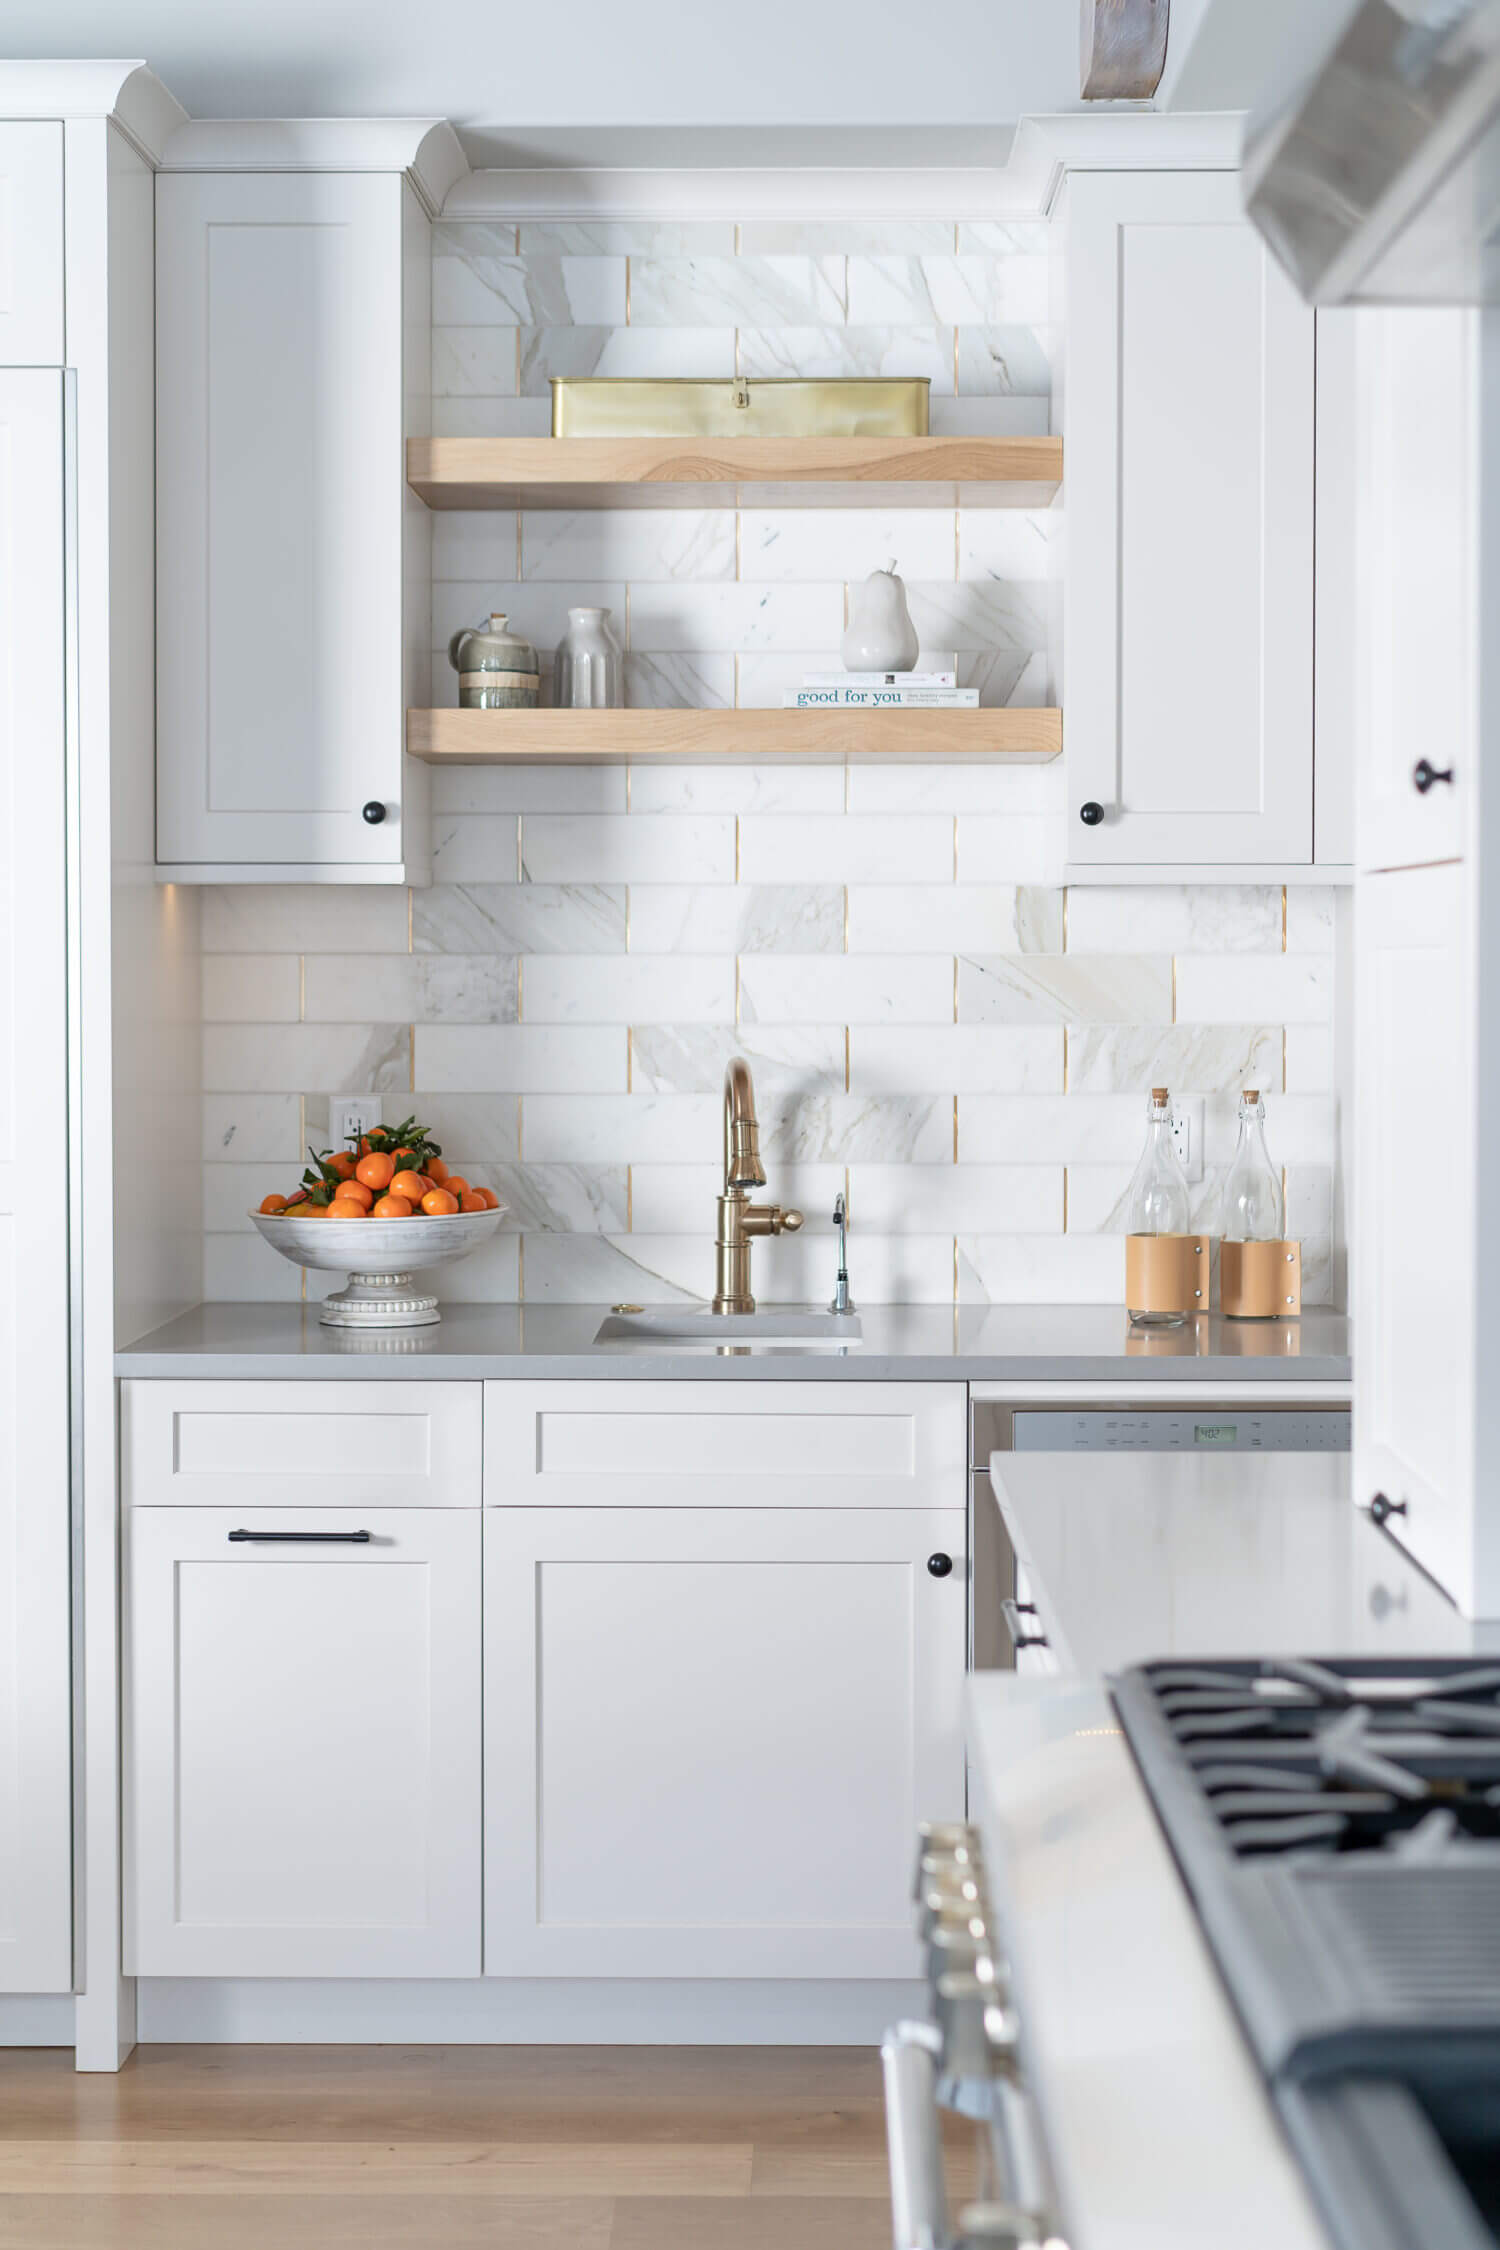 Kitchen Design: Cooking with Gas or Electric? - Dura Supreme Cabinetry